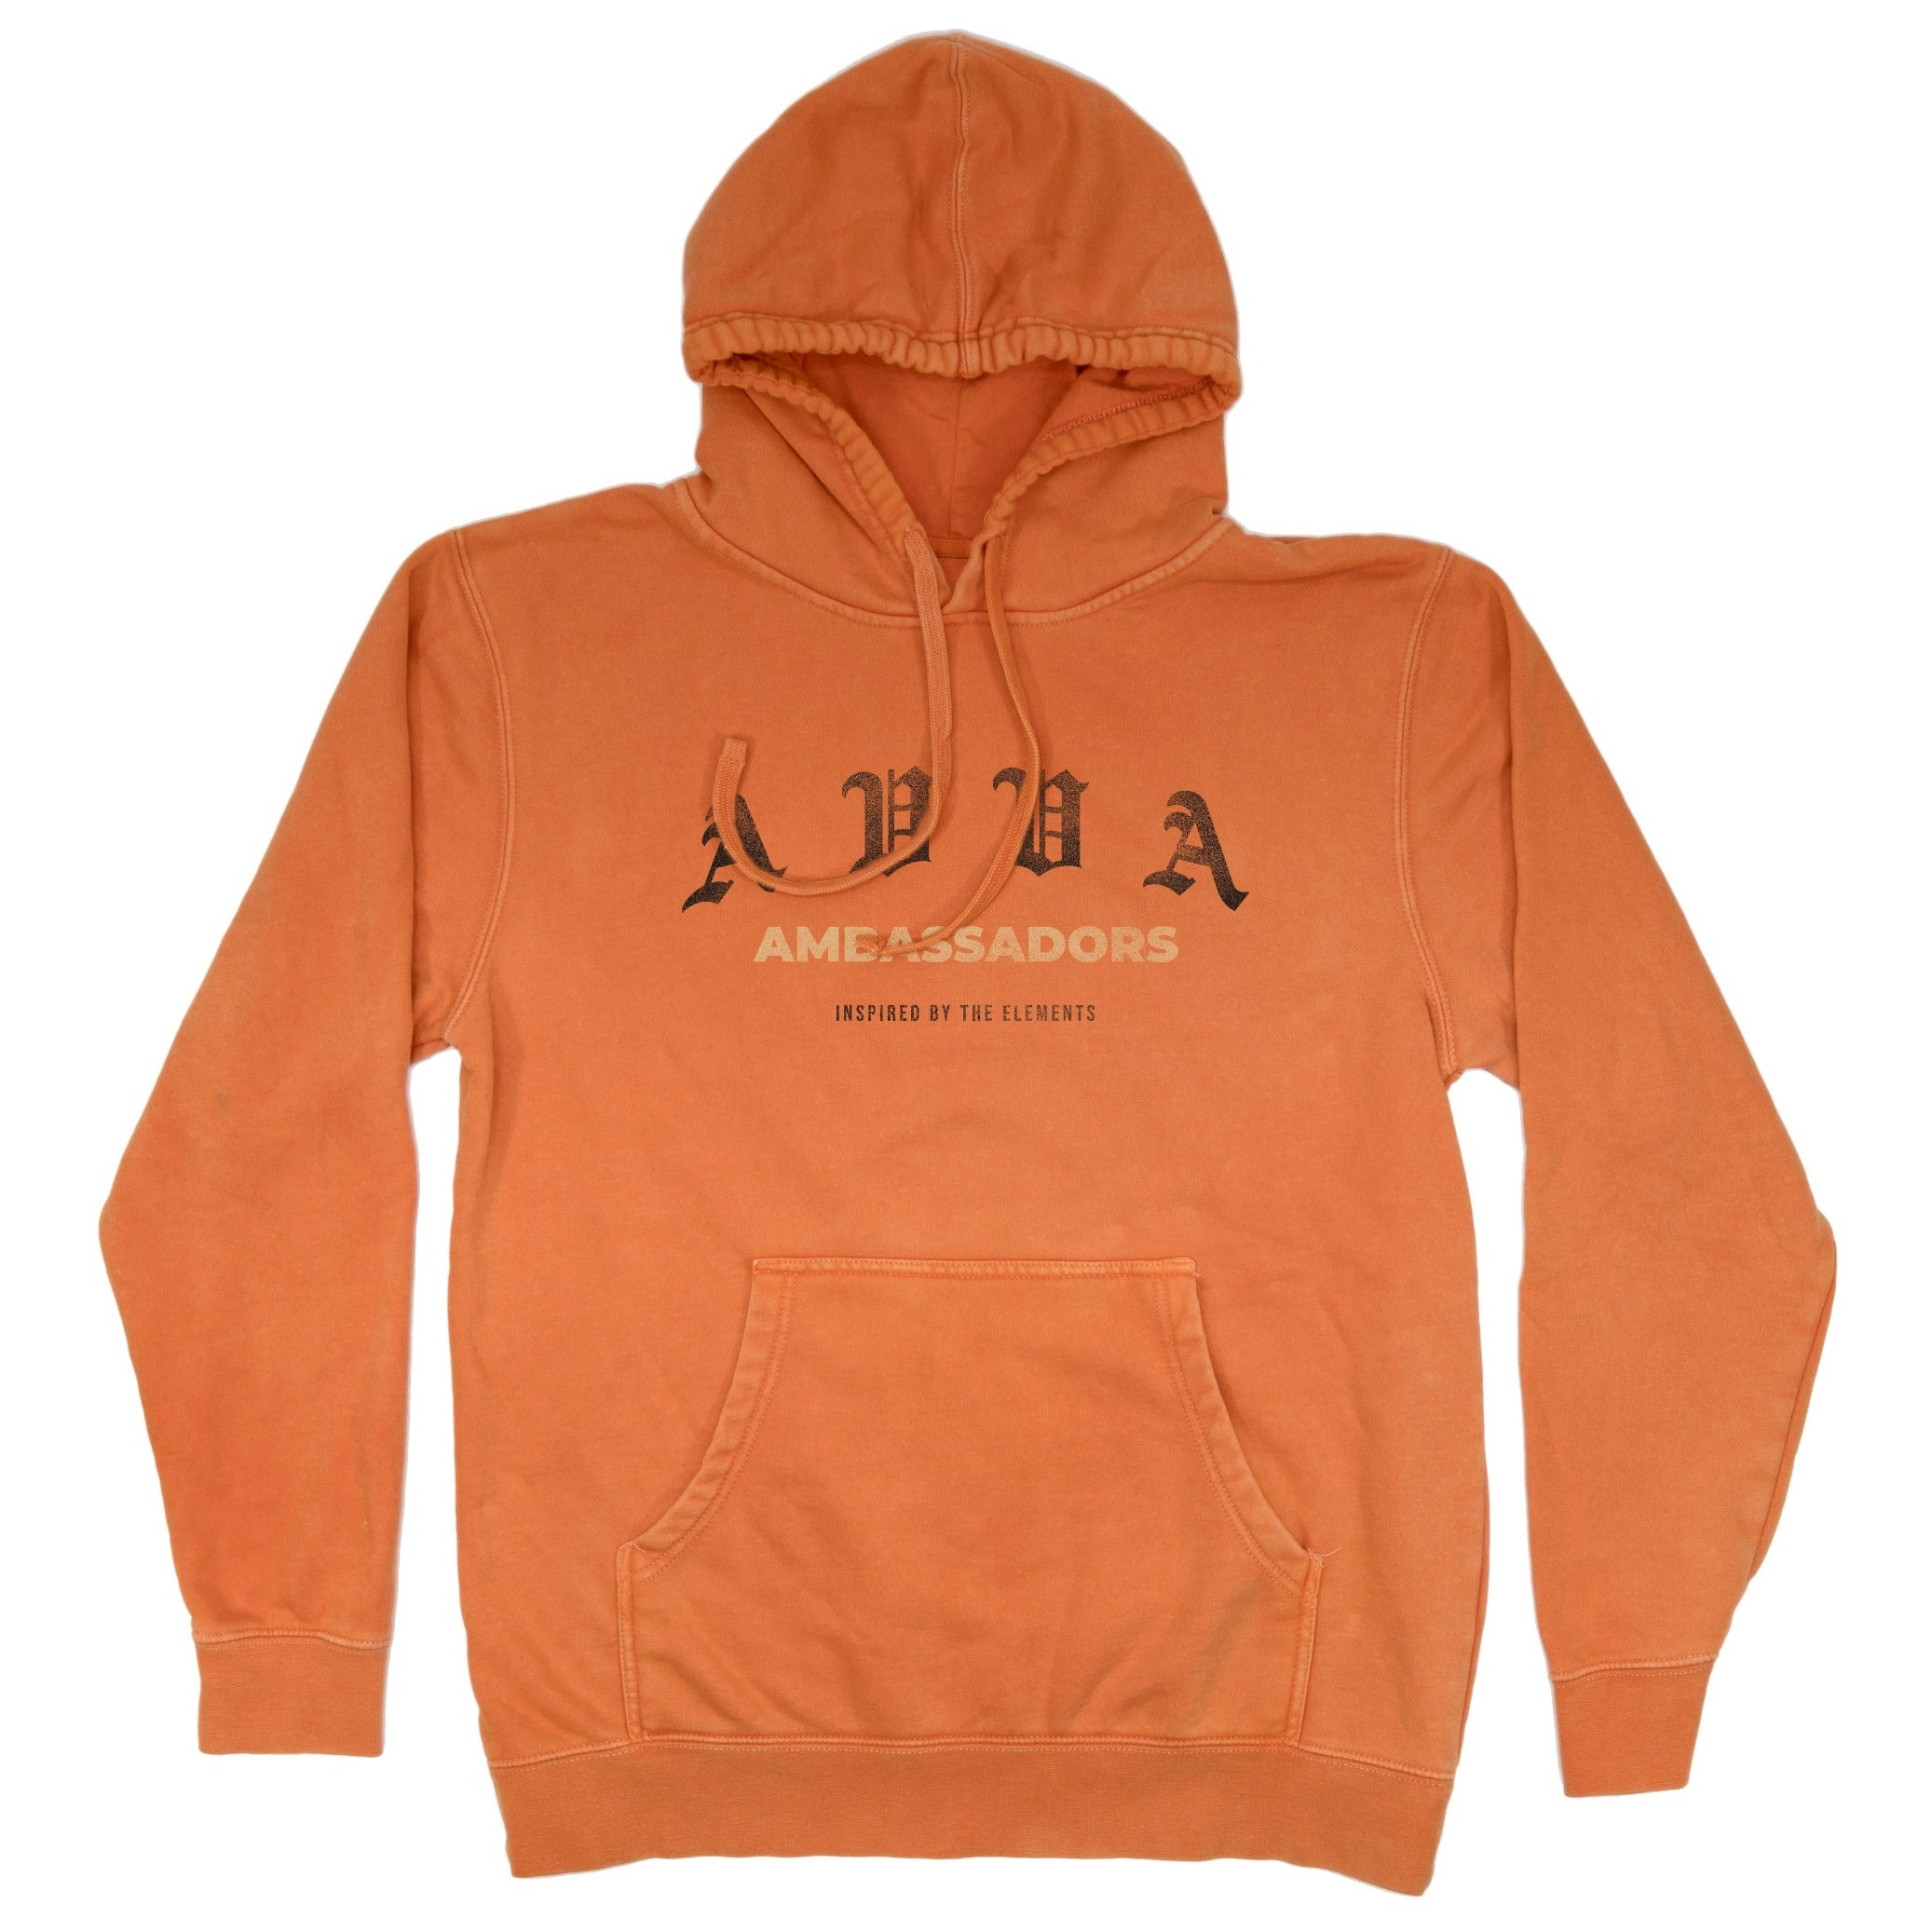 FRONT VIEW OF AVVA ORANGE LAVA FLEECE HOODIE WITH A AVVA AMBASSADORS INSPIRED BY THE ELEMENTS LOGO IN THE MIDDLE.